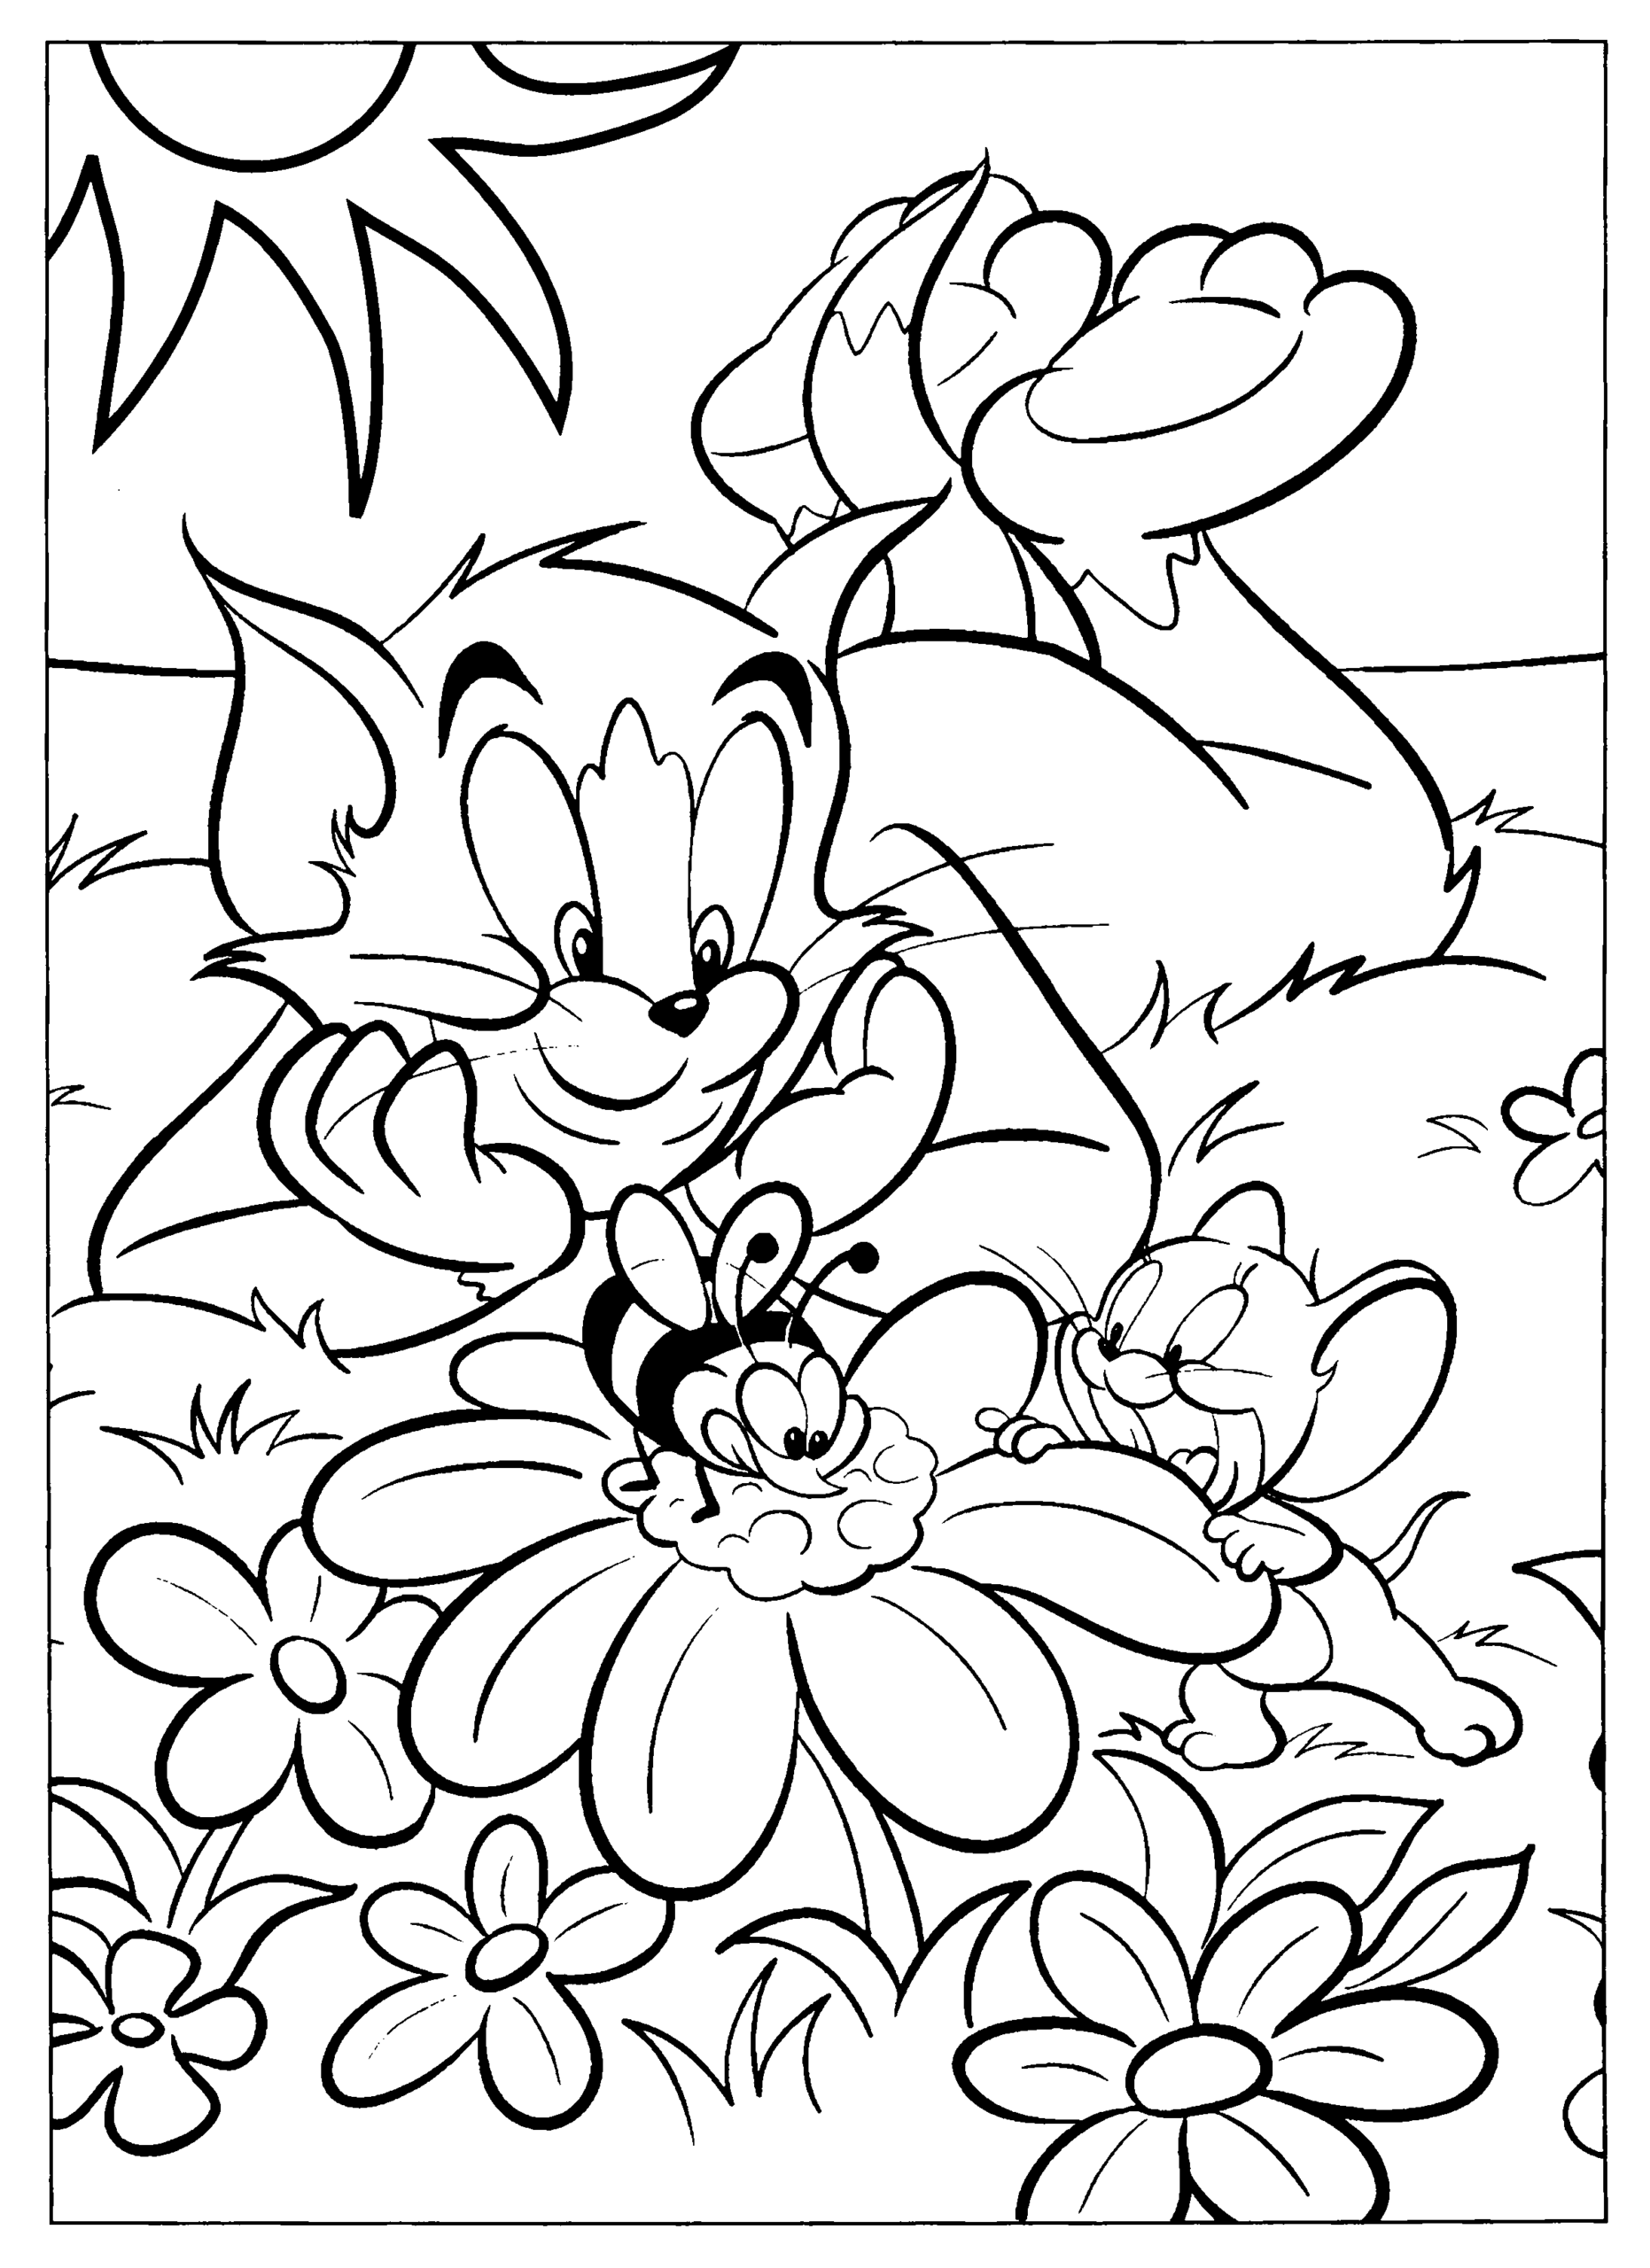 Tom and Jerry Coloring Pages TV Film tom and jerry 0 Printable 2020 10177 Coloring4free